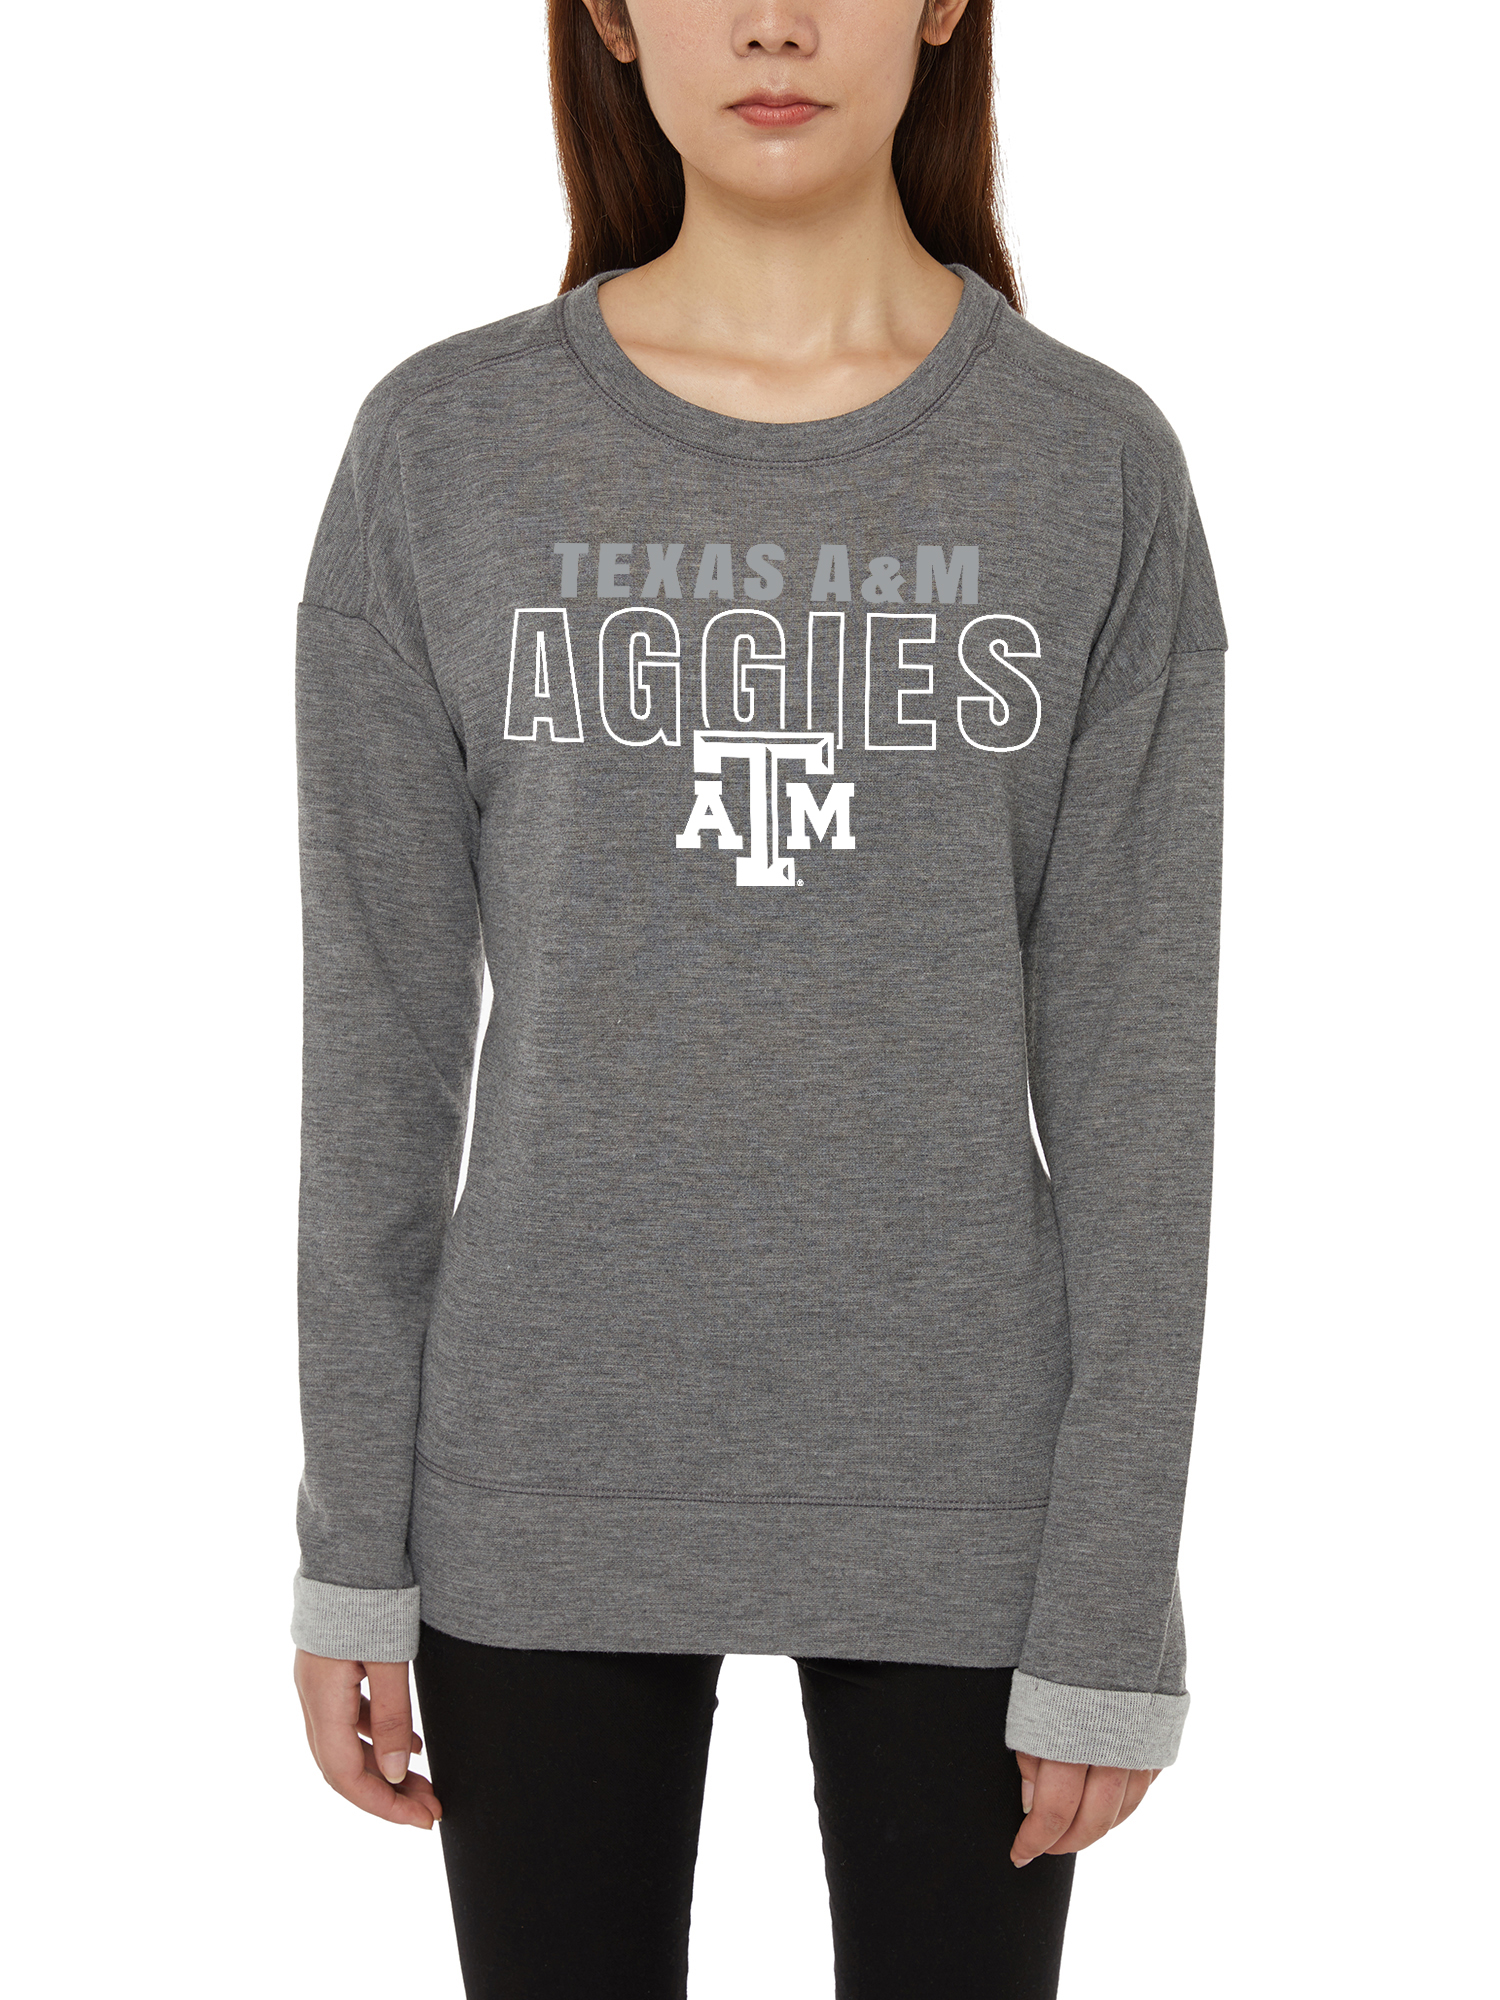 Texas A&M Aggies Ladies LS Top - image 1 of 2